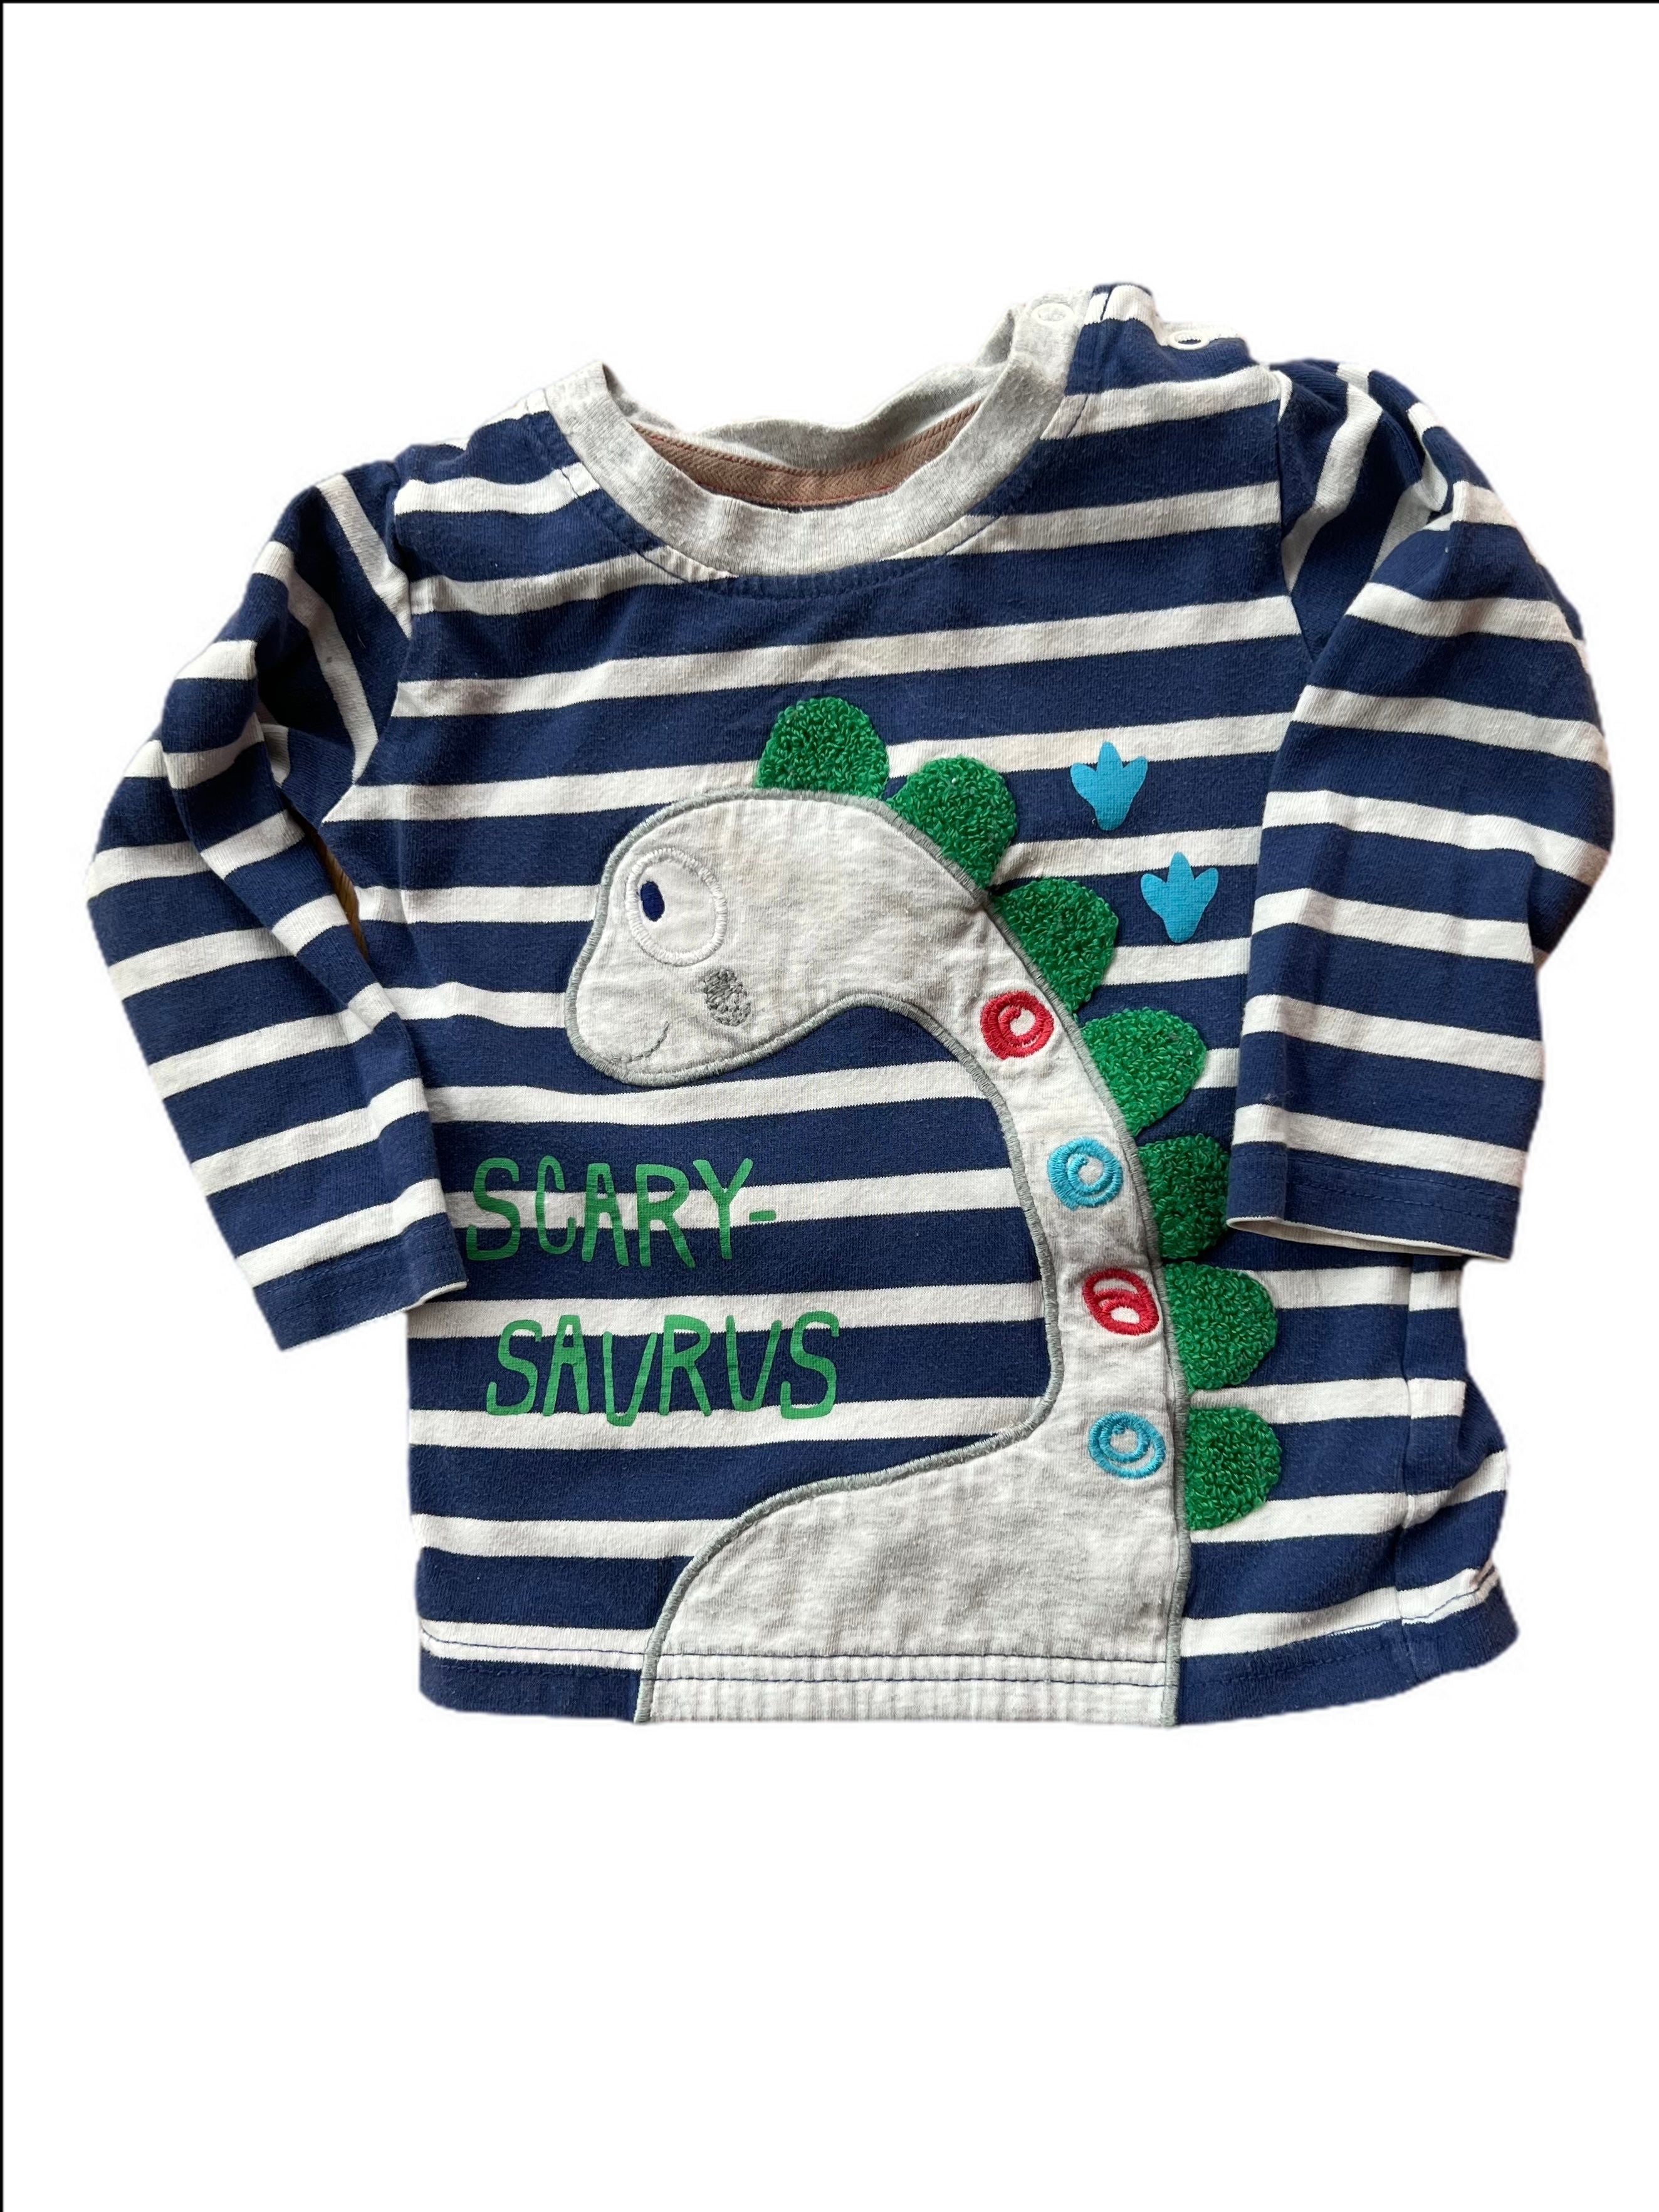 Long Sleeve Striped Top with Scary-Sauraus Applique